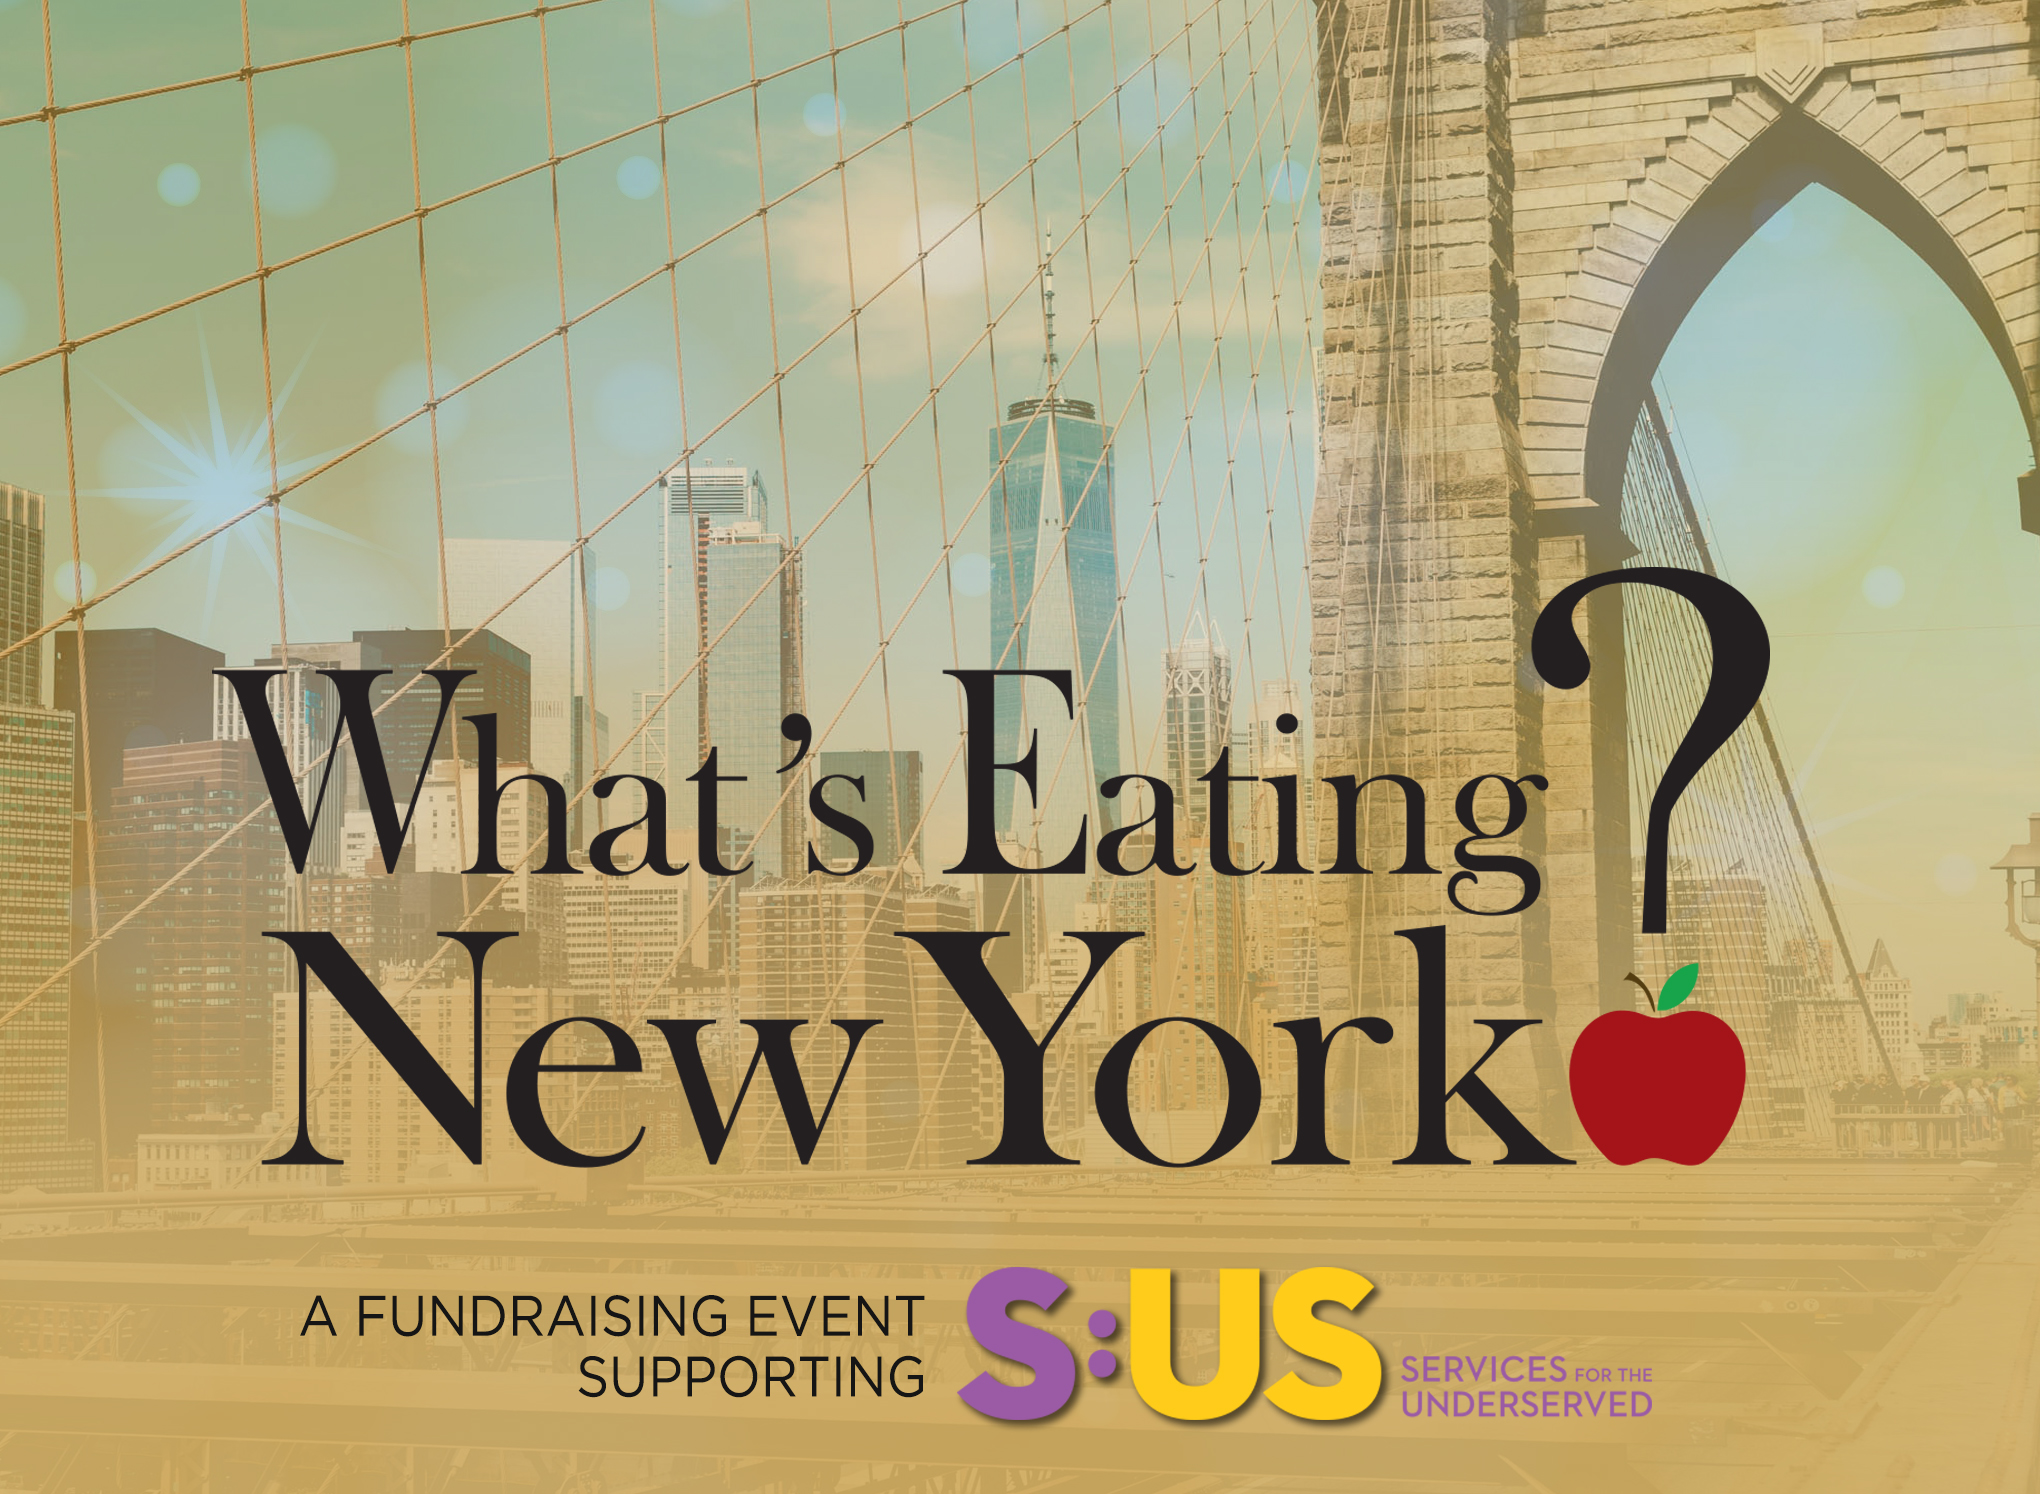 Join us for What’s Eating New York? Virtual Event Series on Tuesday, March 30 at 6:30pm ET